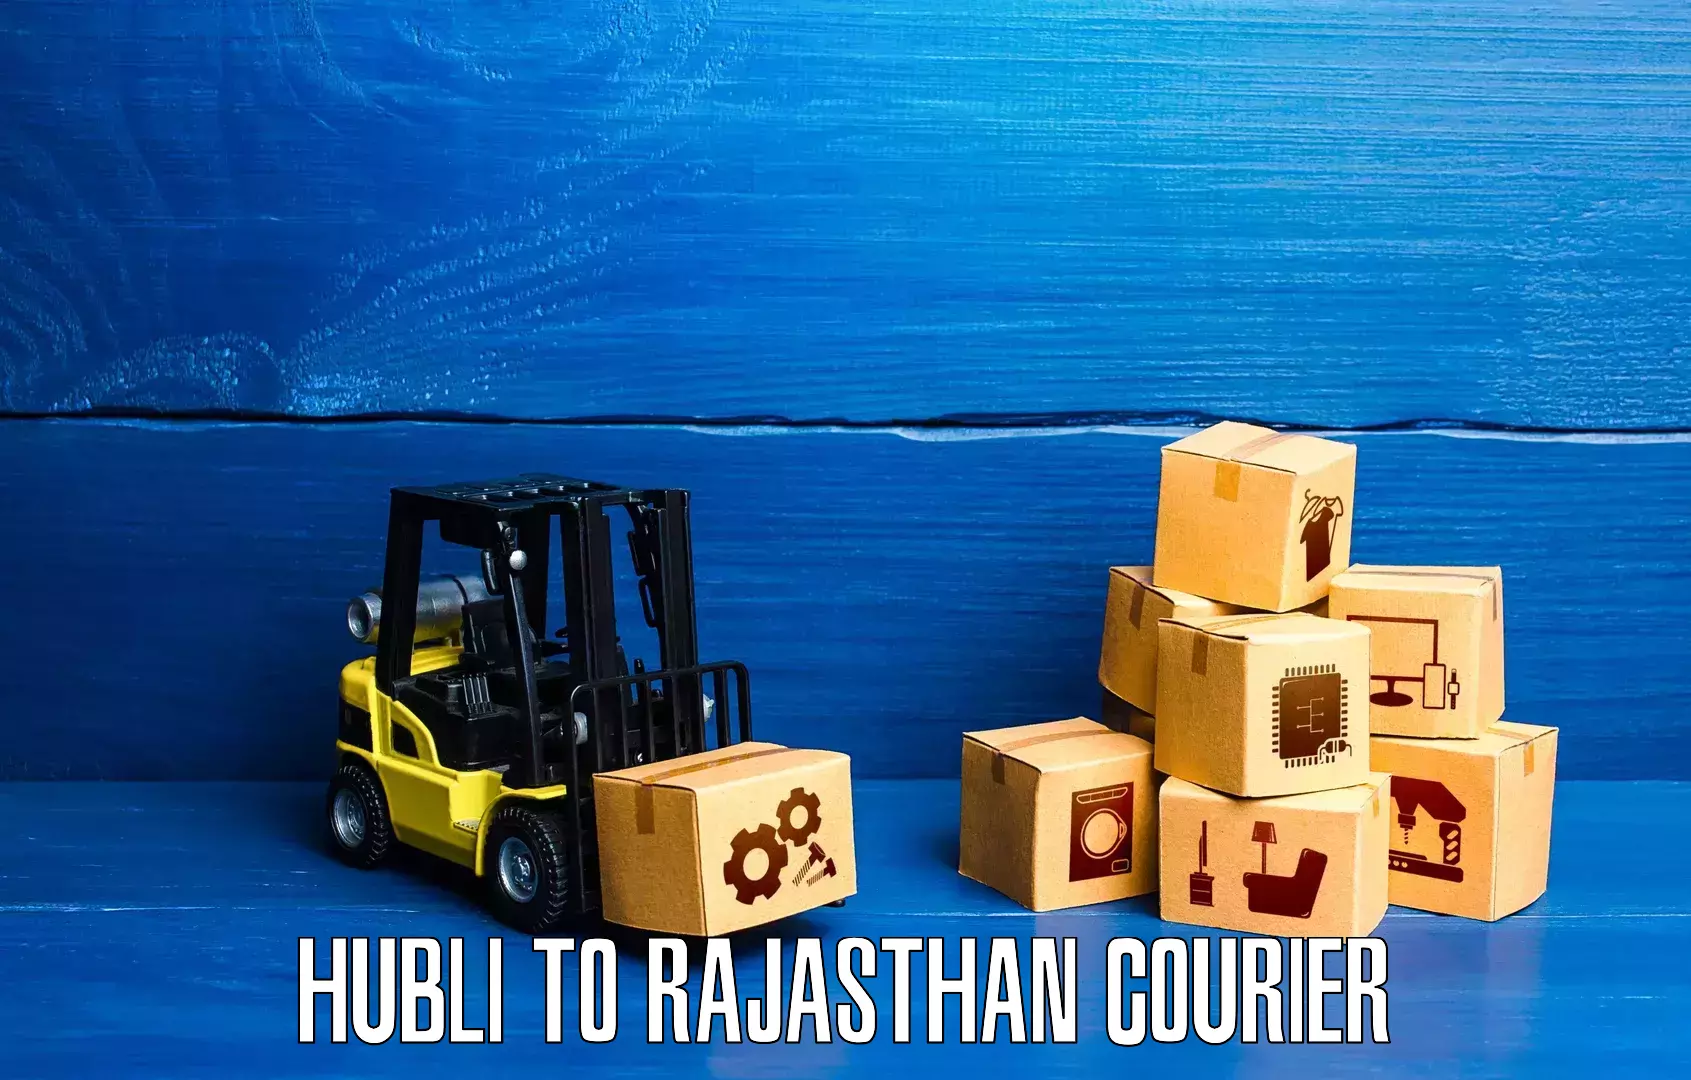 State-of-the-art courier technology Hubli to Paota